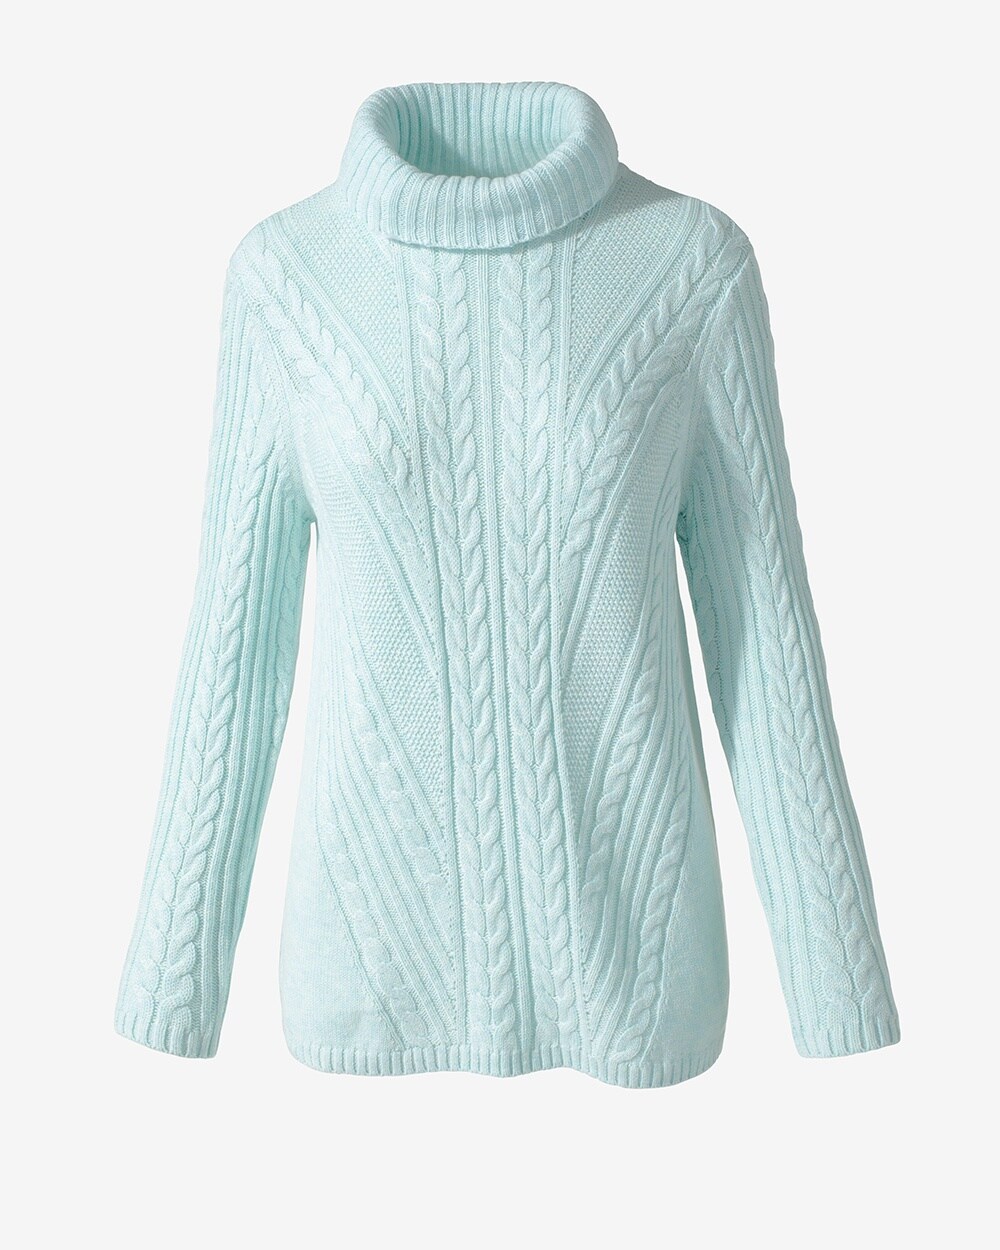 Turtleneck Novelty Cable Sweater